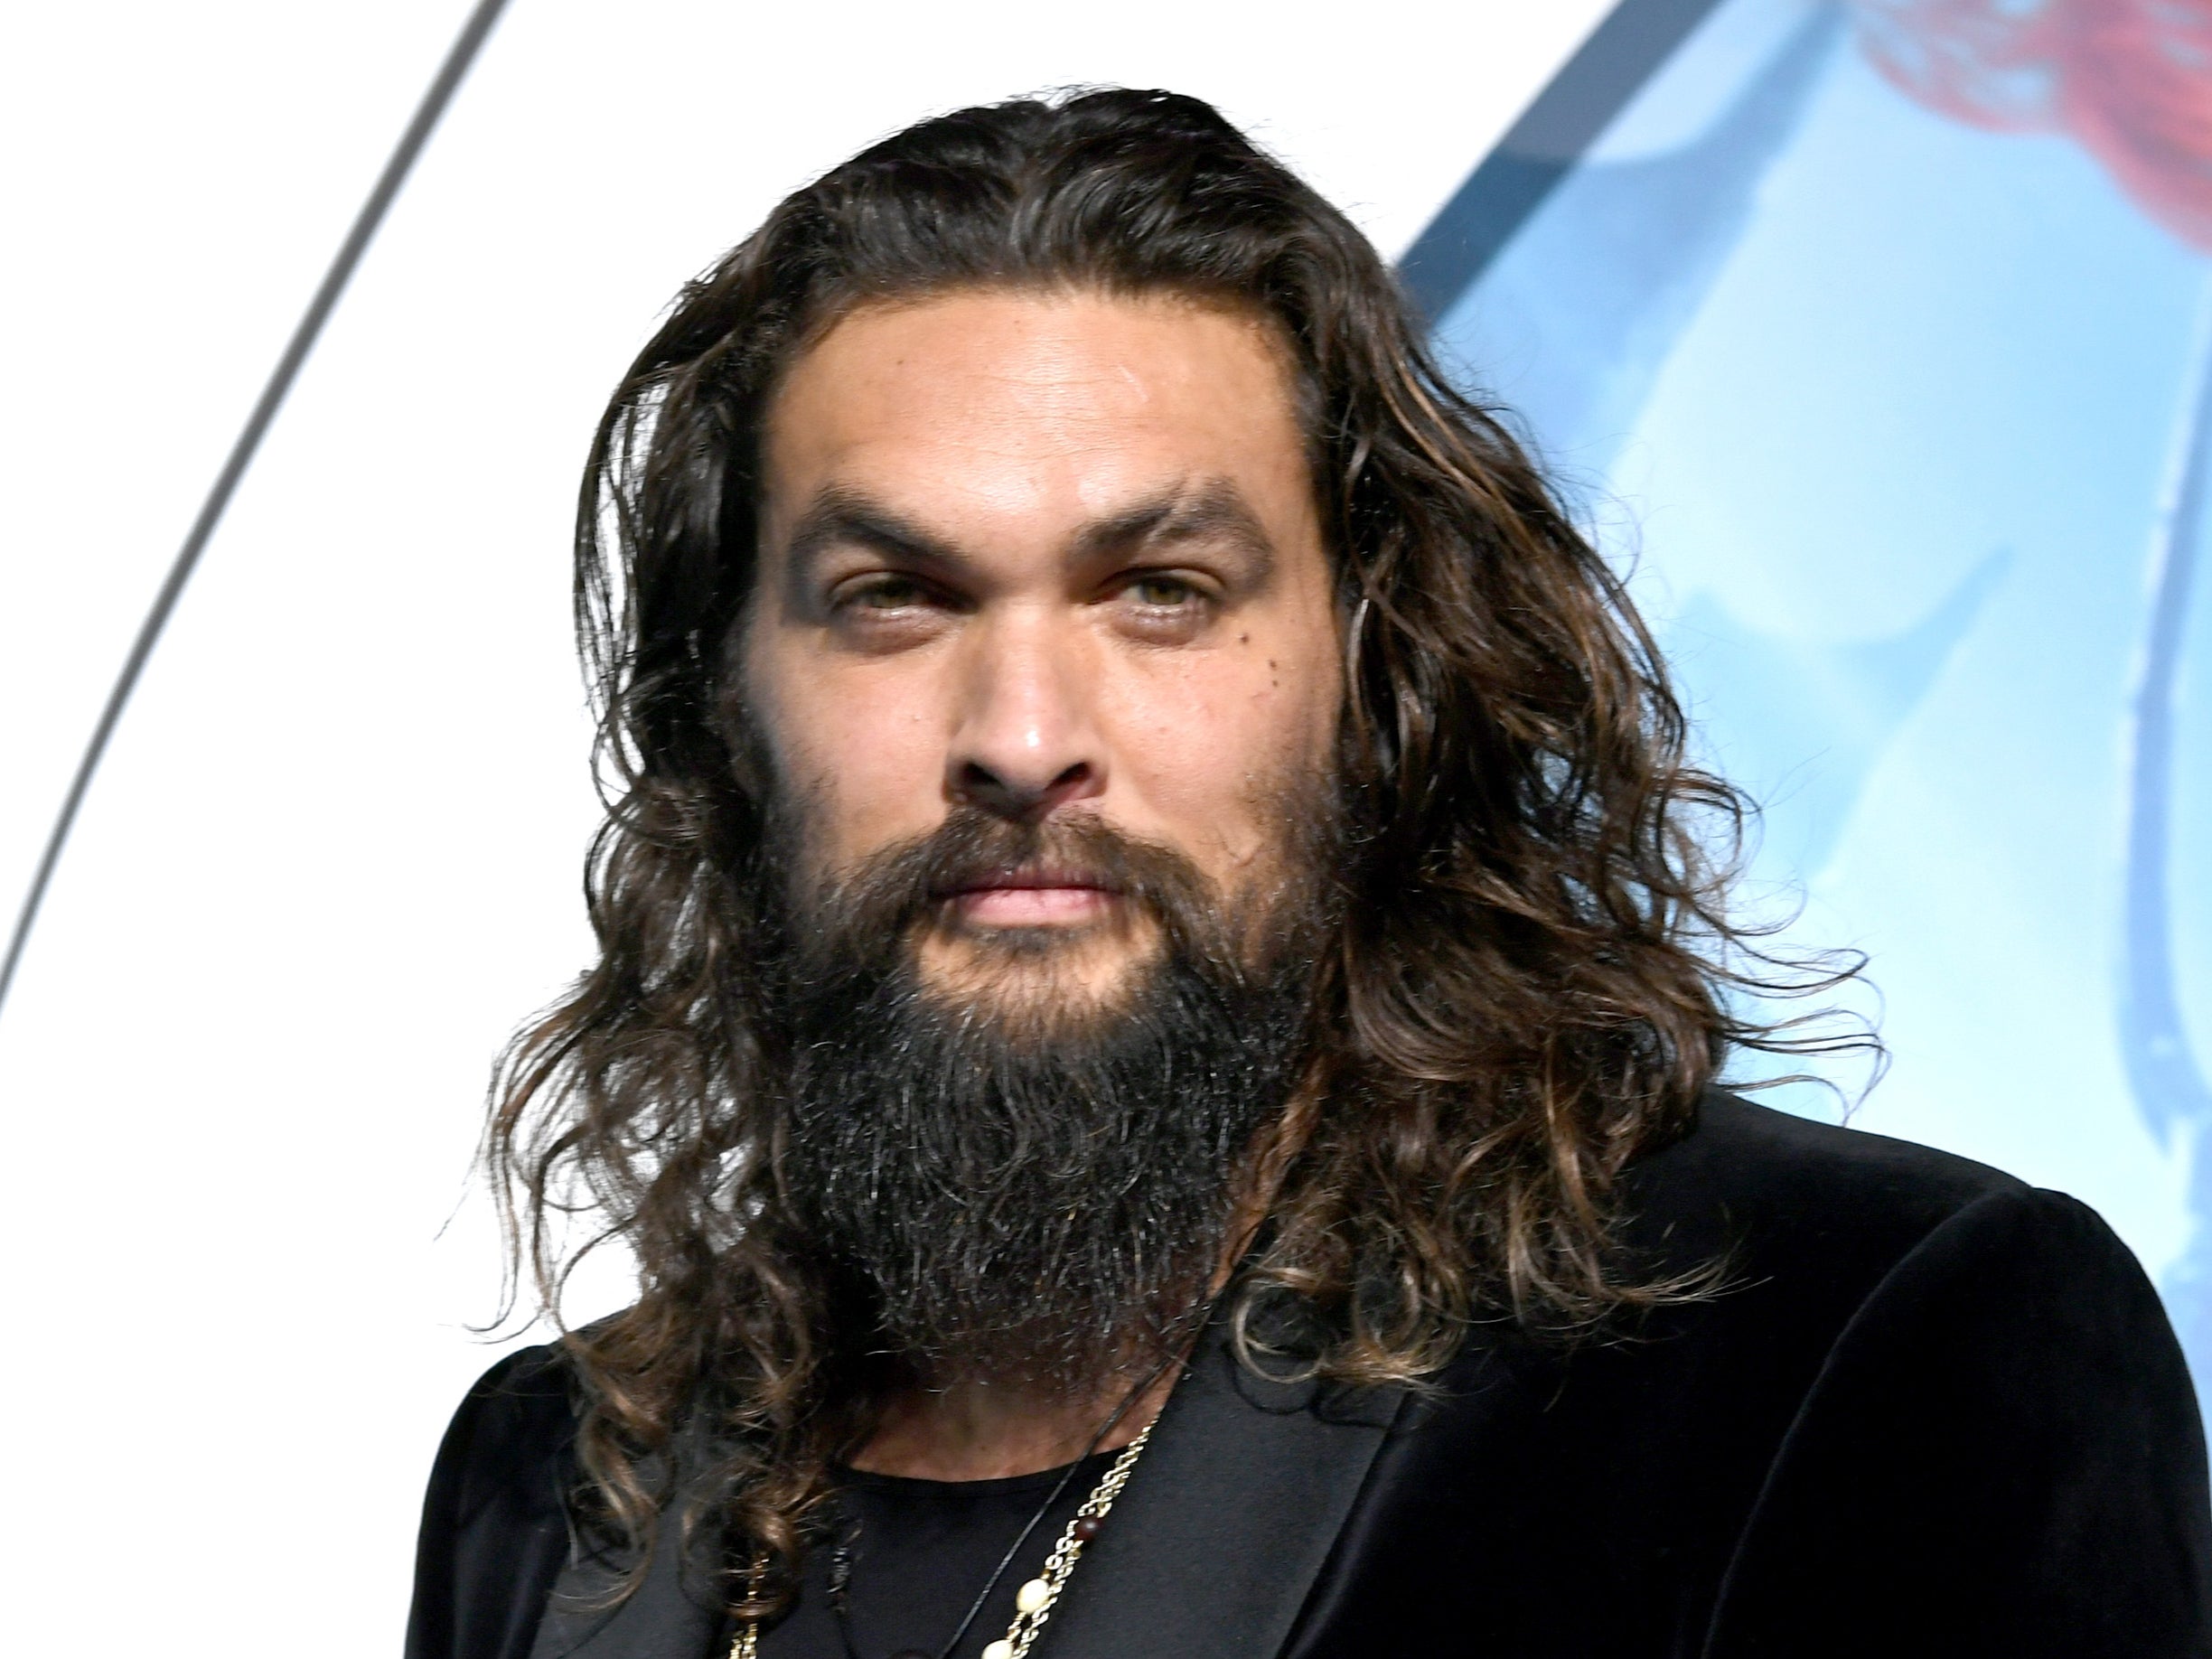 Jason Momoa was not happy with a question about ‘Game of Thrones’